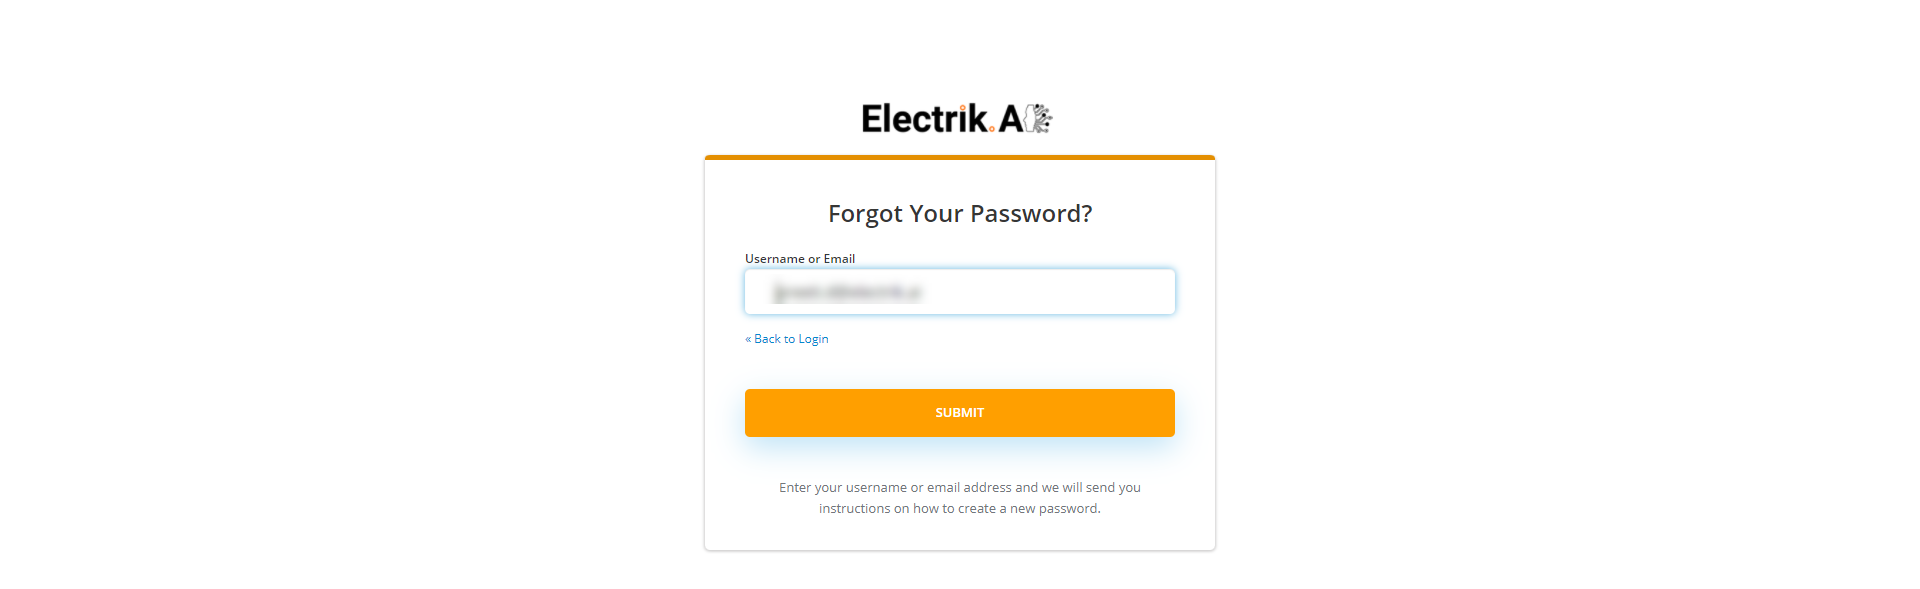 Forgot or Reset your Password Step 3